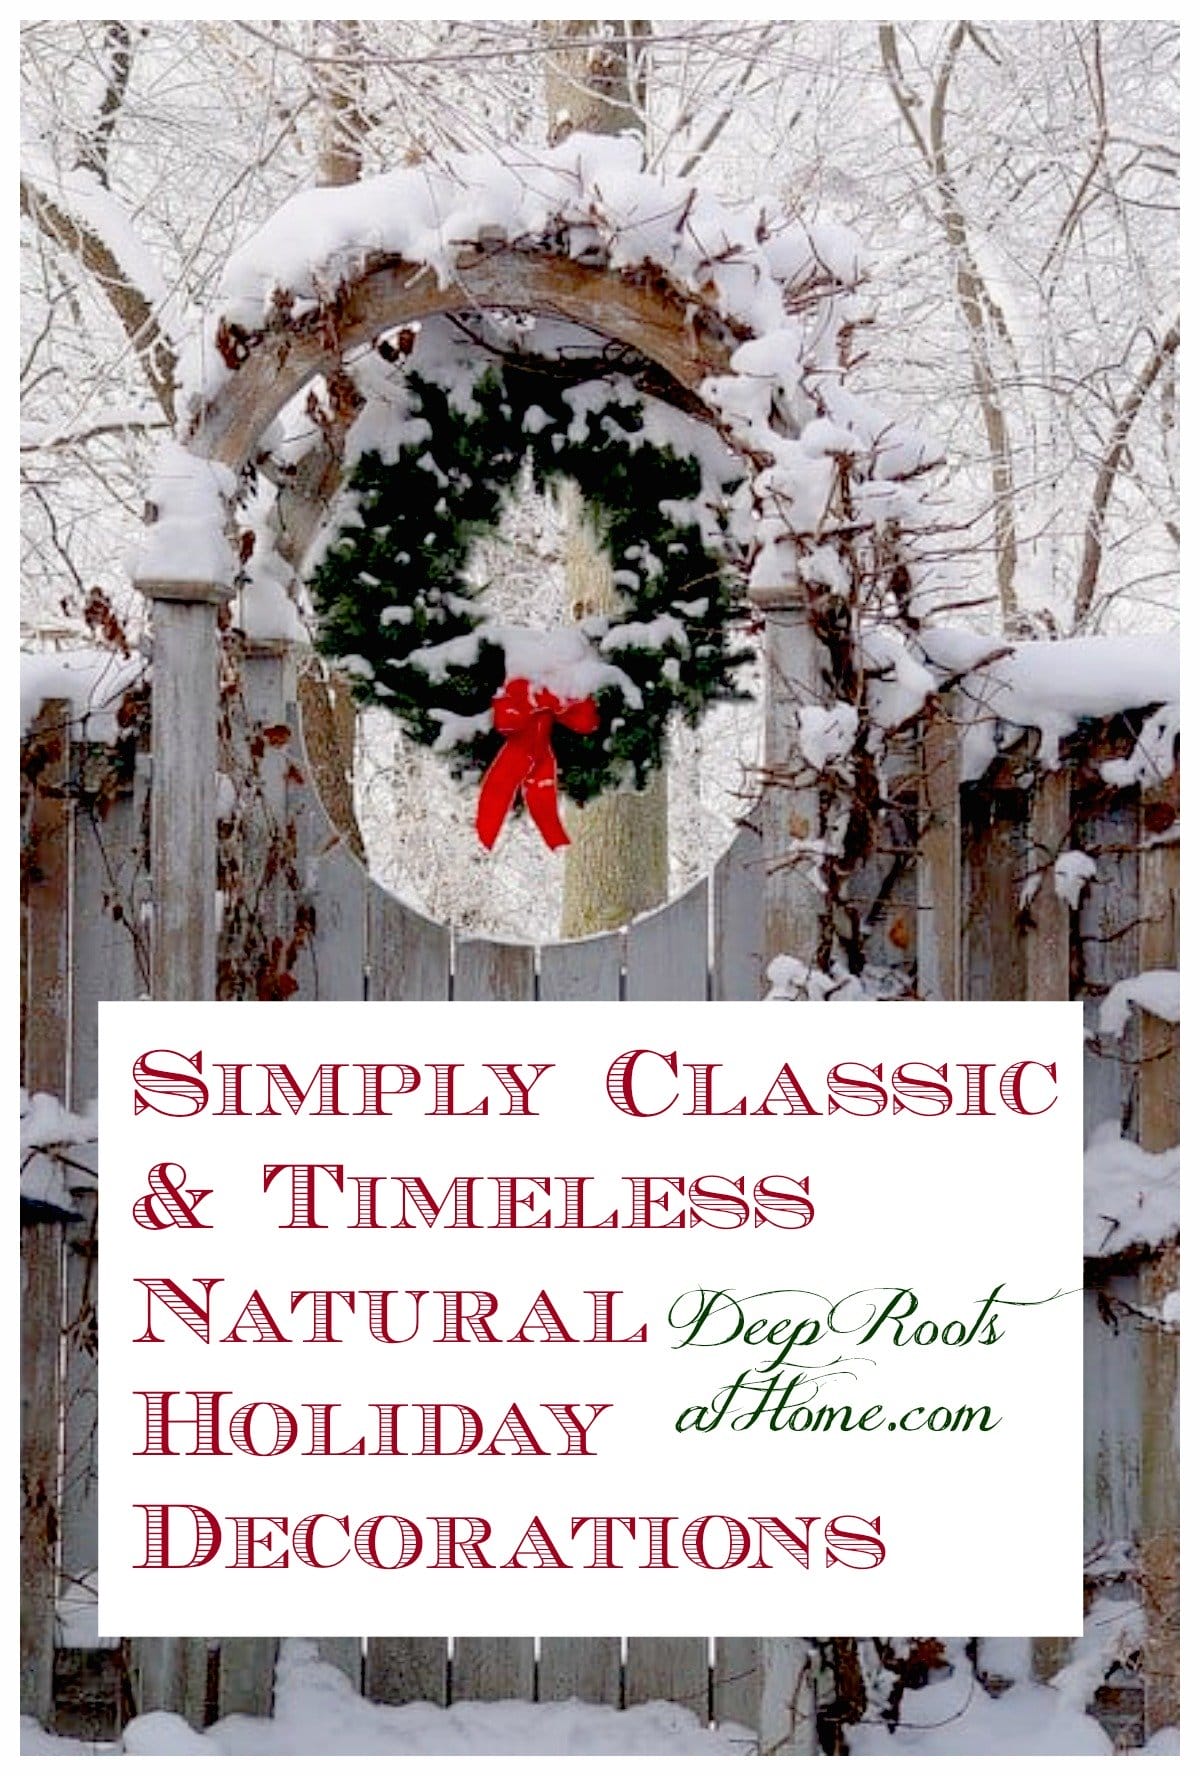 Simply Classic & Timeless Natural Holiday Decorations. Arched gateway with Christmas wreath